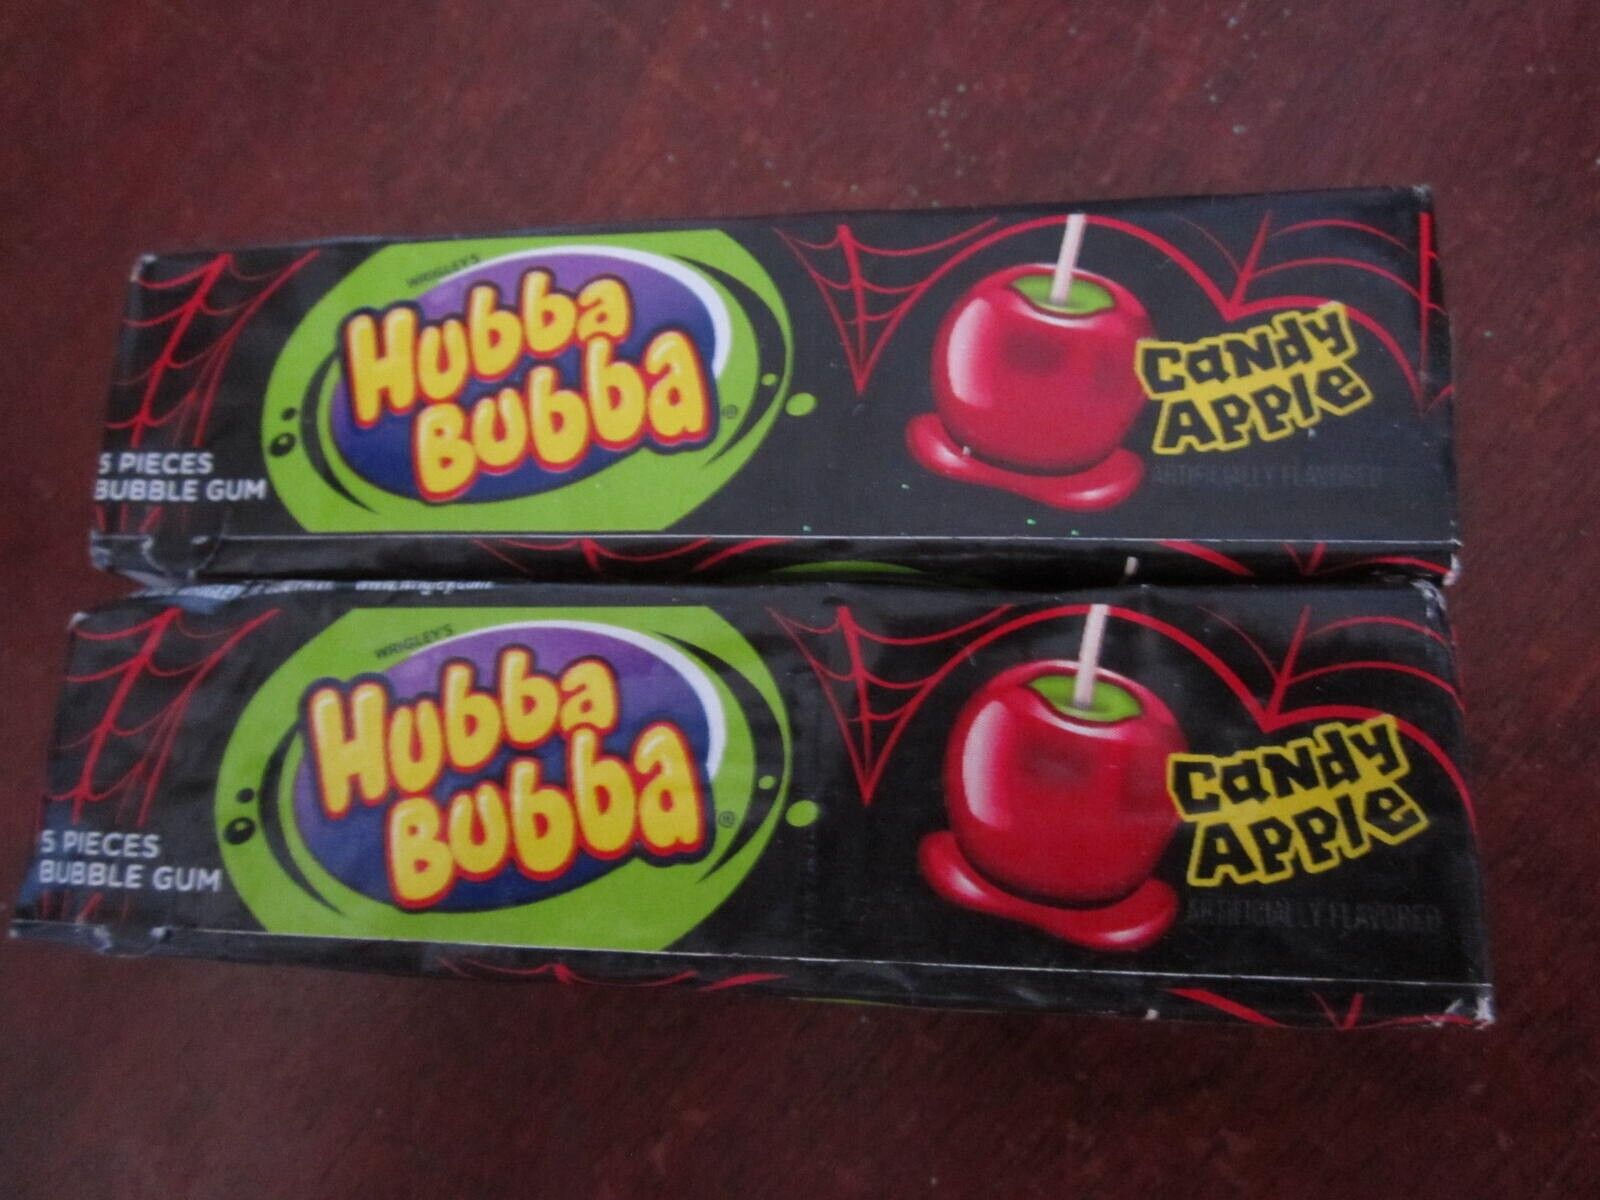 Extremely RARE Candy Apple Hubba Bubba Gum, 2 Sealed Collector Packs